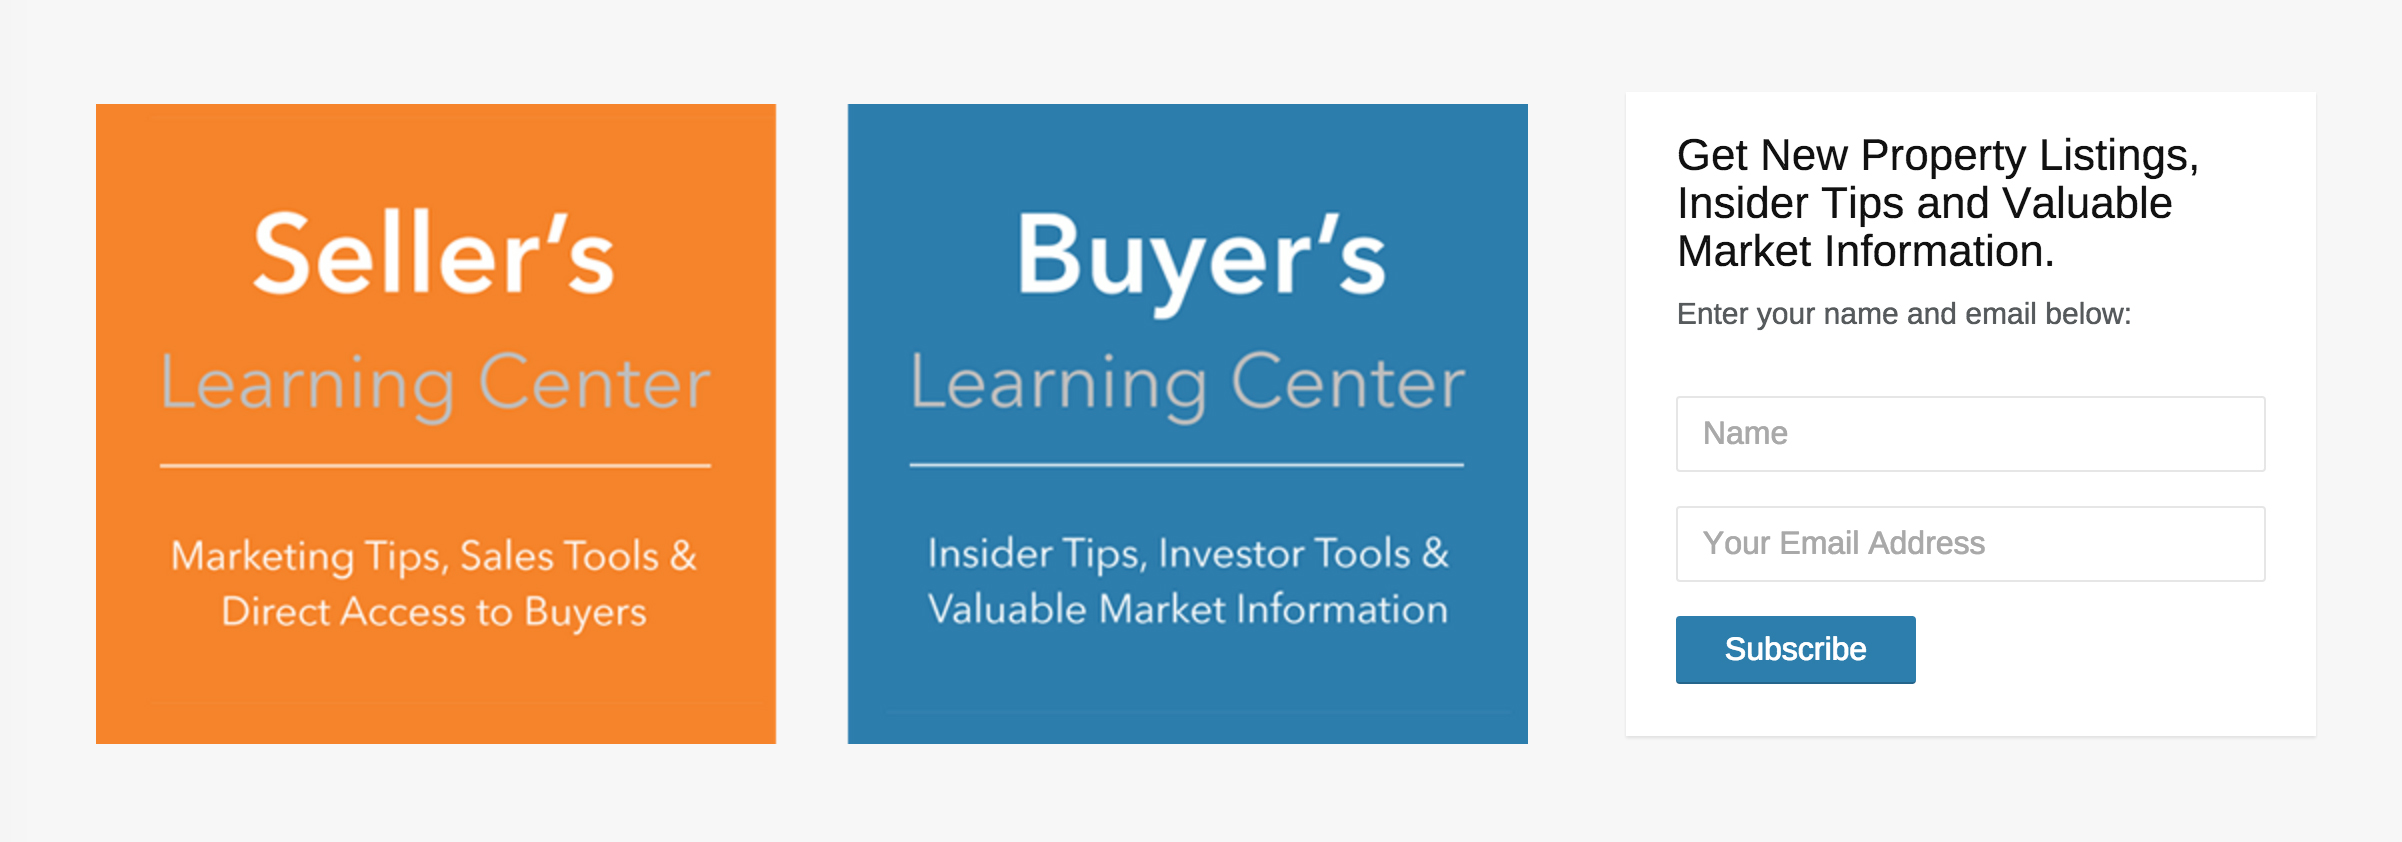 7. Buyers & Sellers Learning Centers